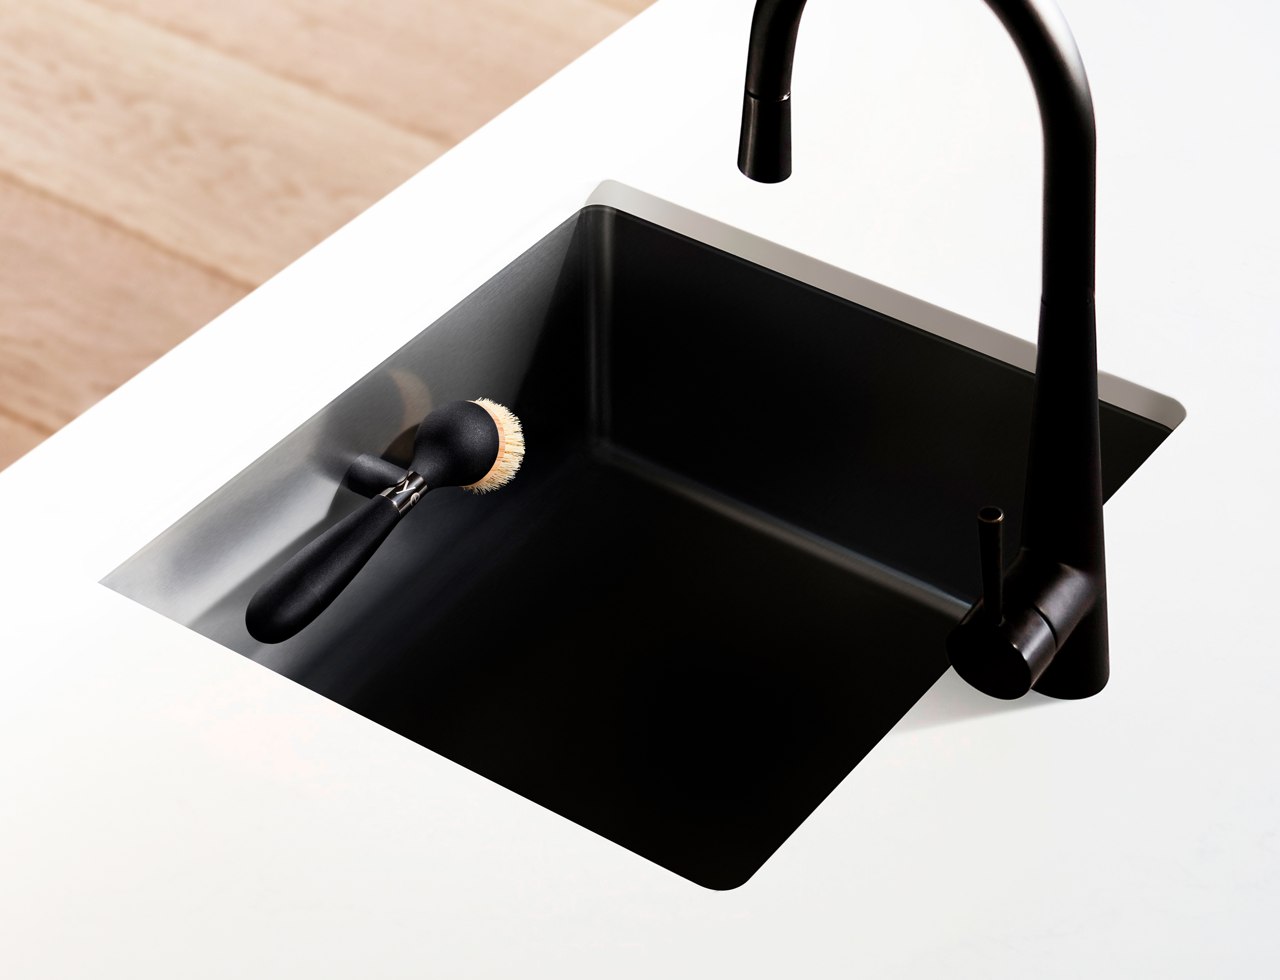 https://www.yankodesign.com/images/design_news/2021/12/magnetic_dish_brush_conveniently_hides_in_the_sink_01.jpg